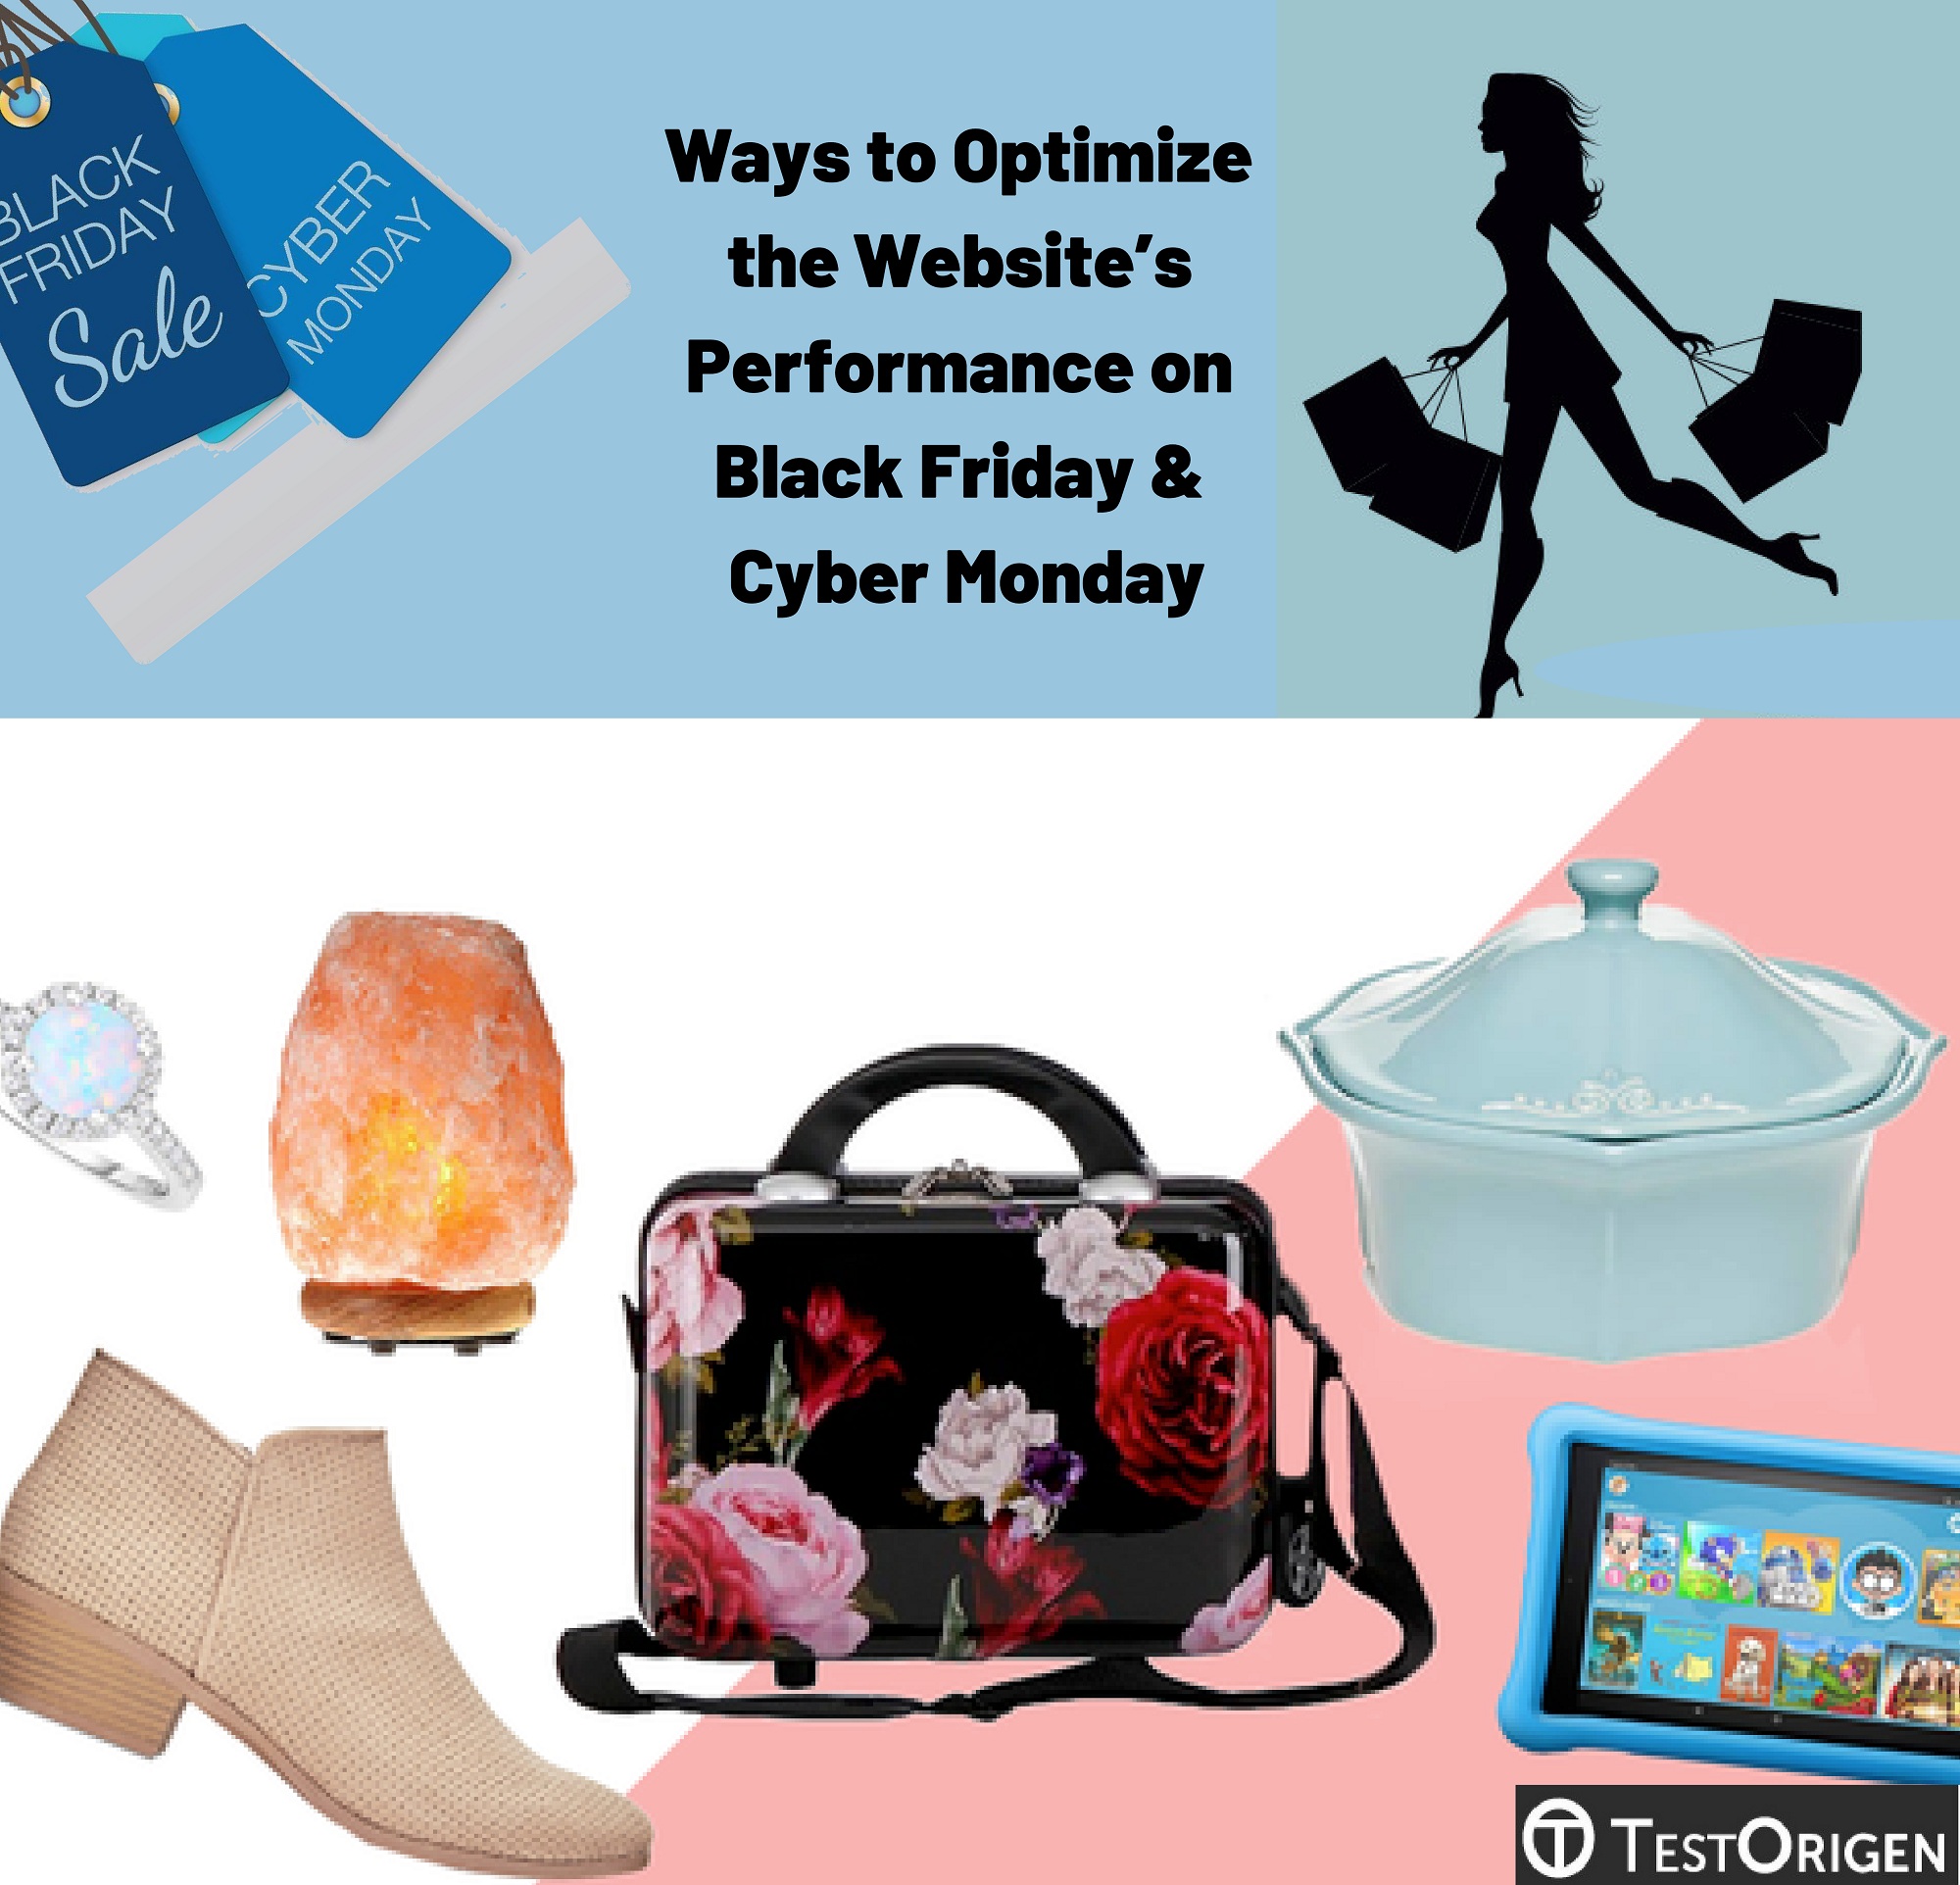 Ways to Optimize the Website’s Performance on Black Friday & Cyber Monday